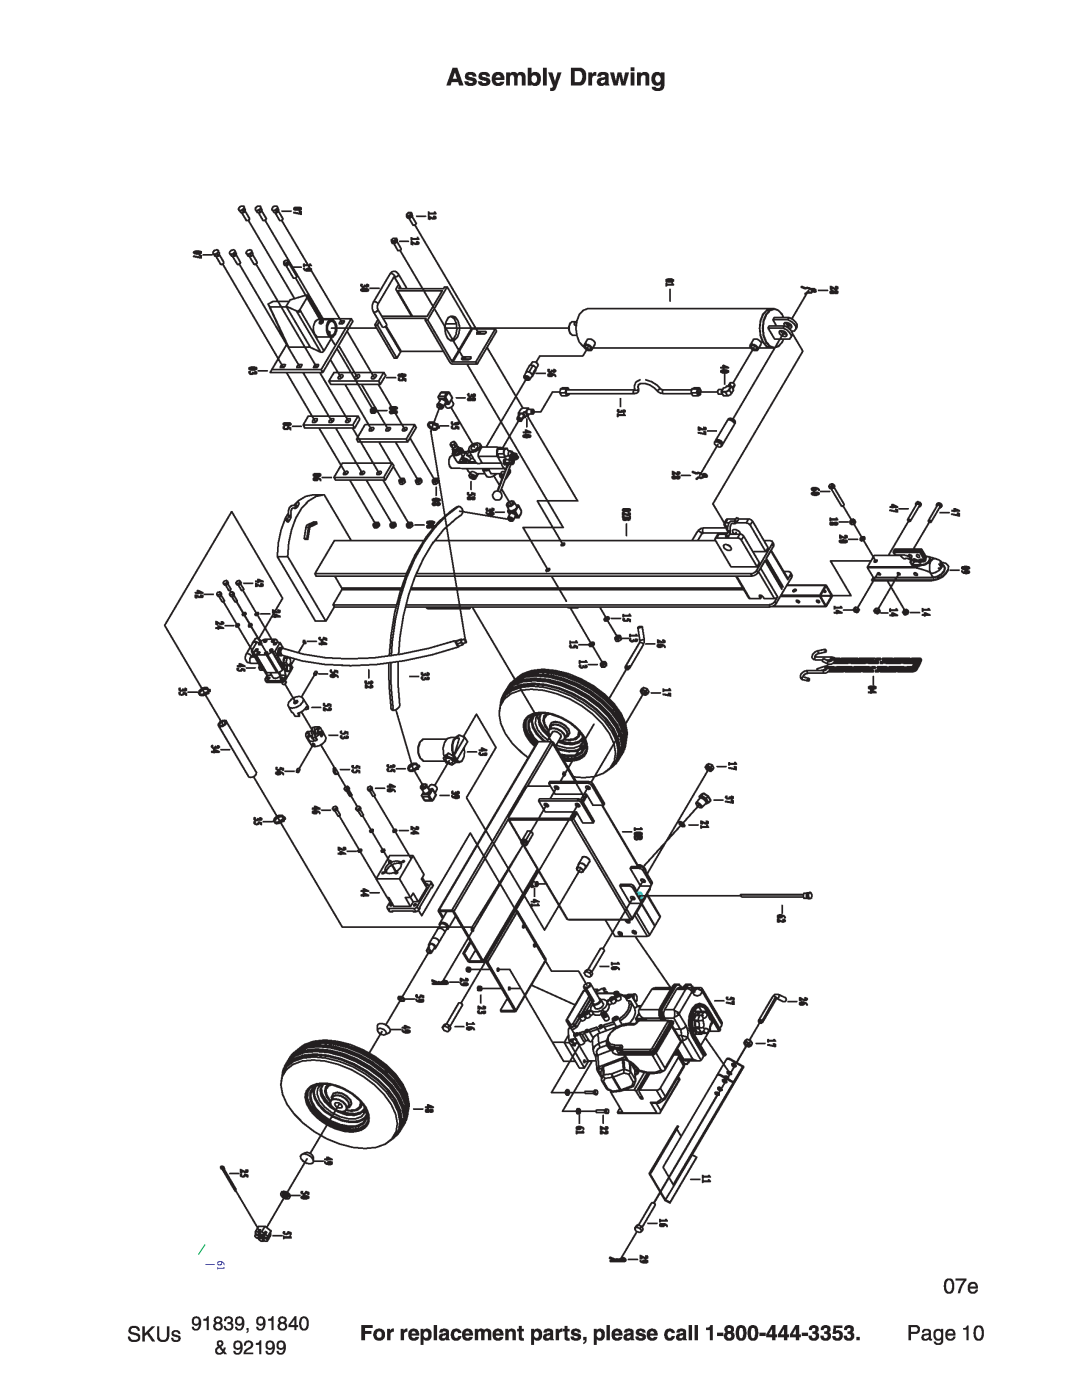 Harbor Freight Tools 91839, 91840, 92199 manual Assembly Drawing, For replacement parts, please call 